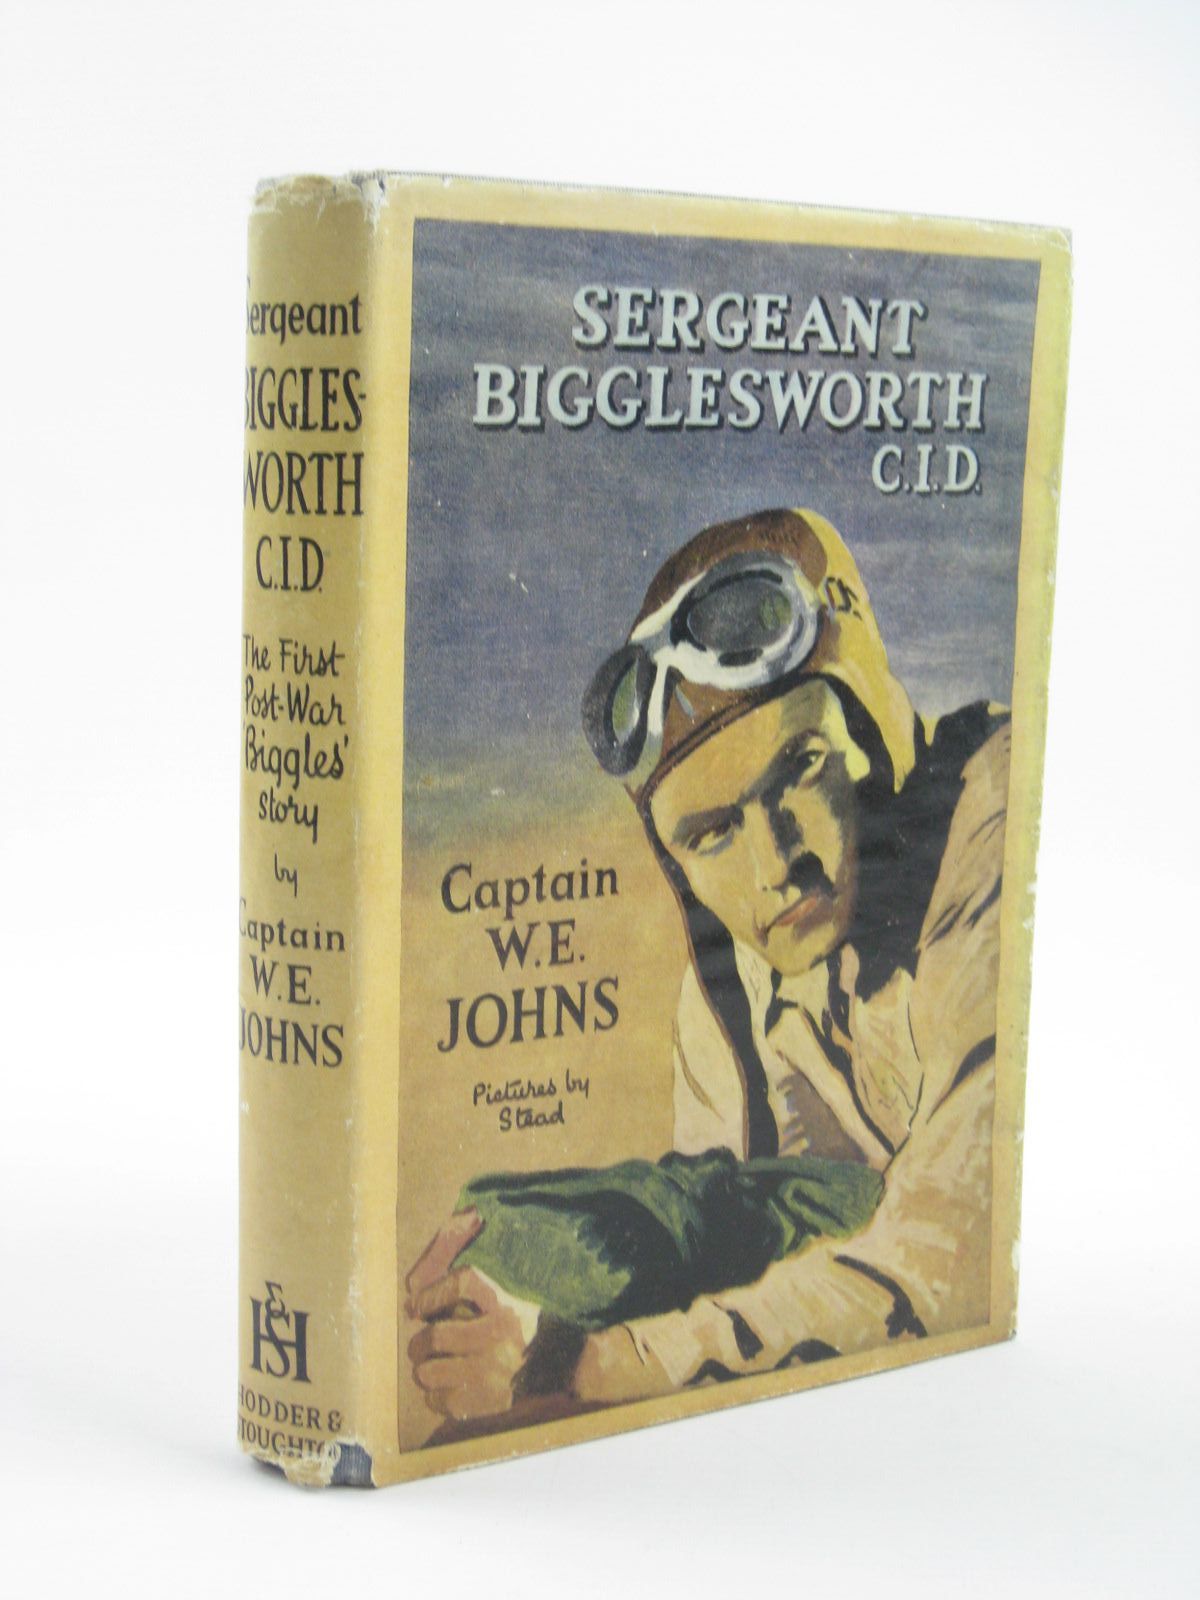 Cover of SERGEANT BIGGLESWORTH C.I.D. by W.E. Johns